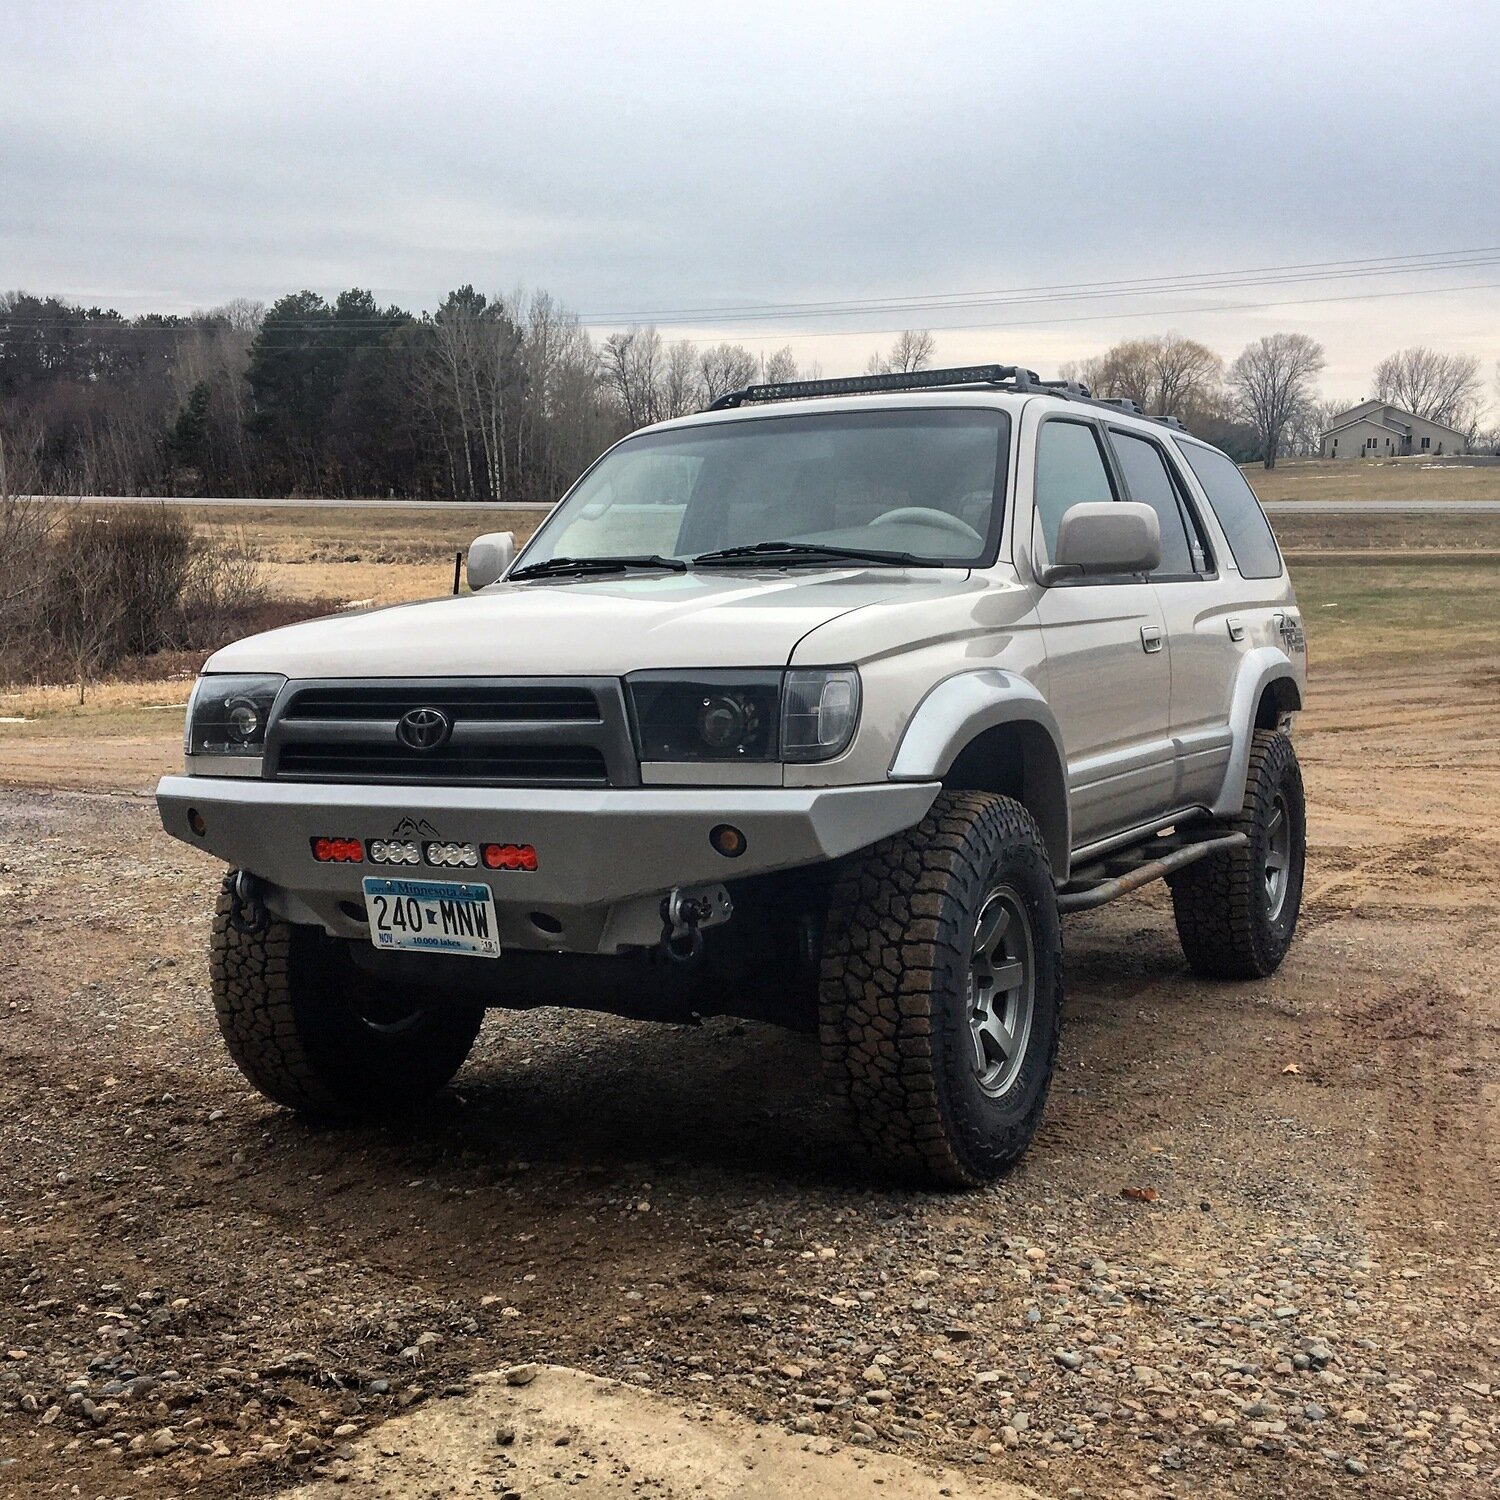 The Alpha bumper was designed specifically for 3rd gen 4runners but will al...